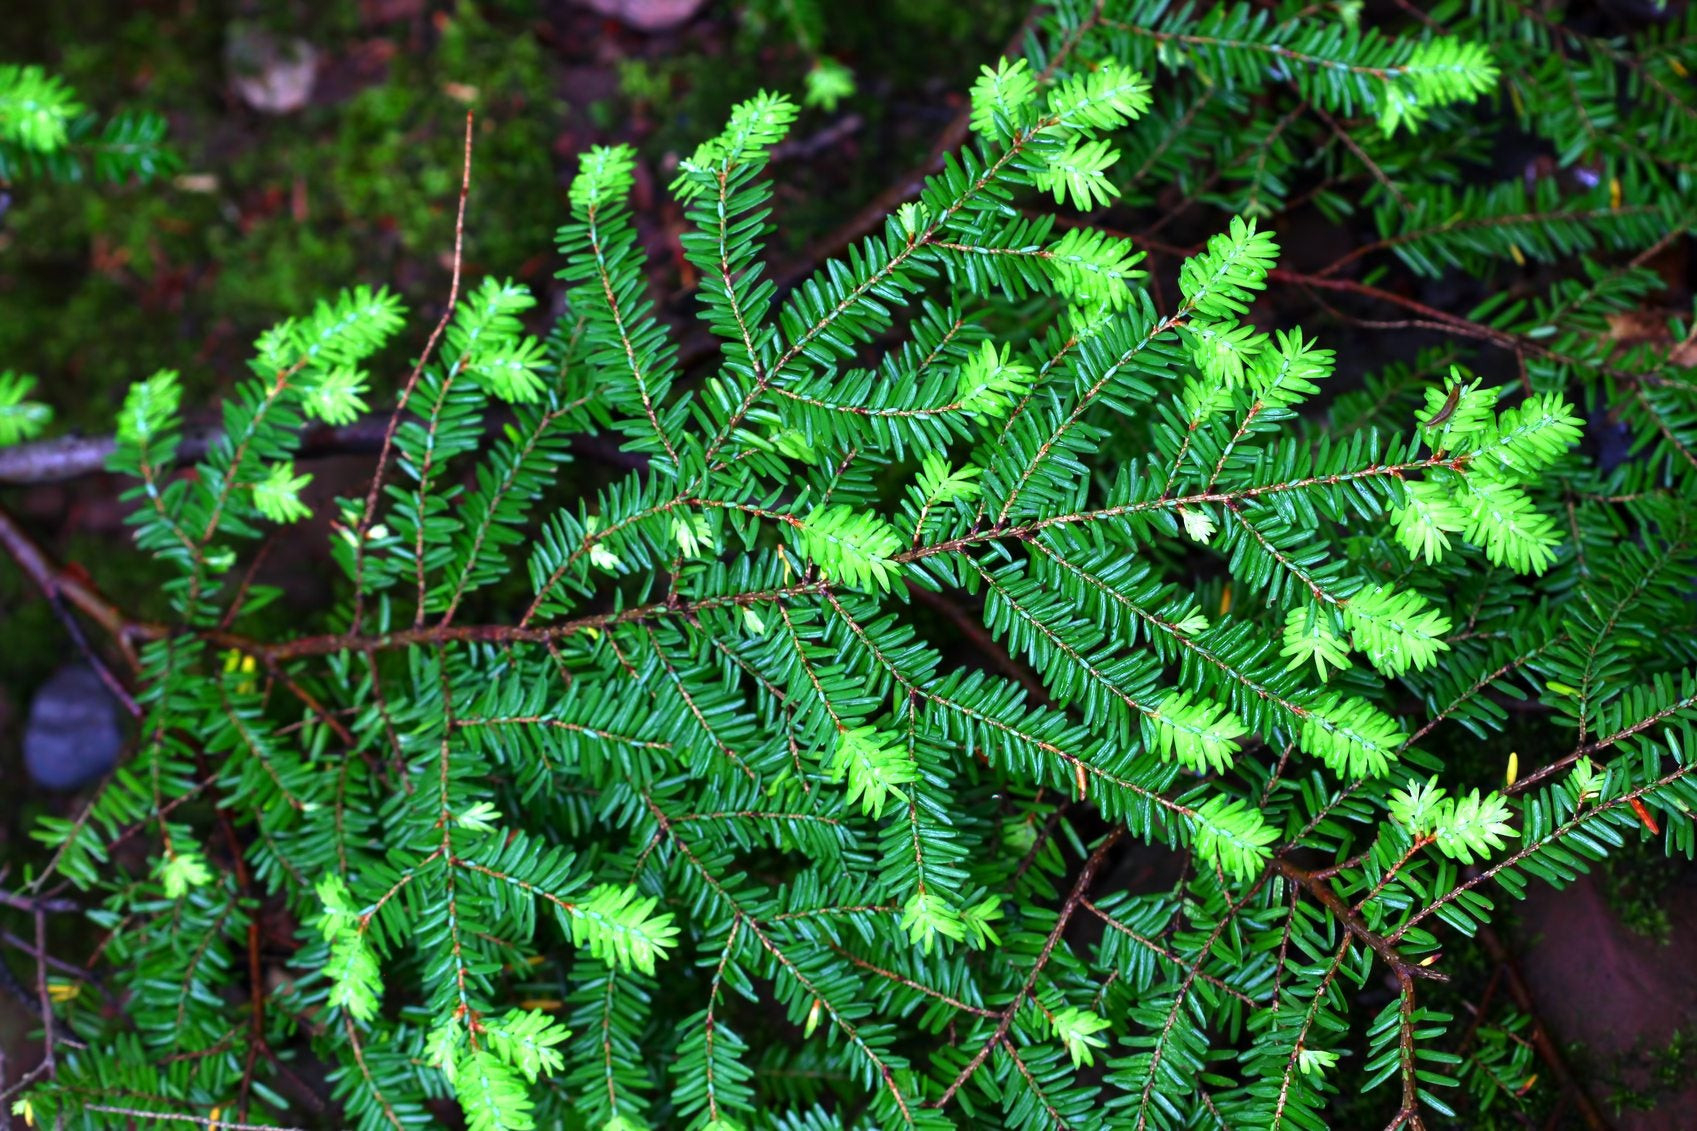 Canadian Hemlock Tree Facts - How To Care For Canadian Hemlock Trees